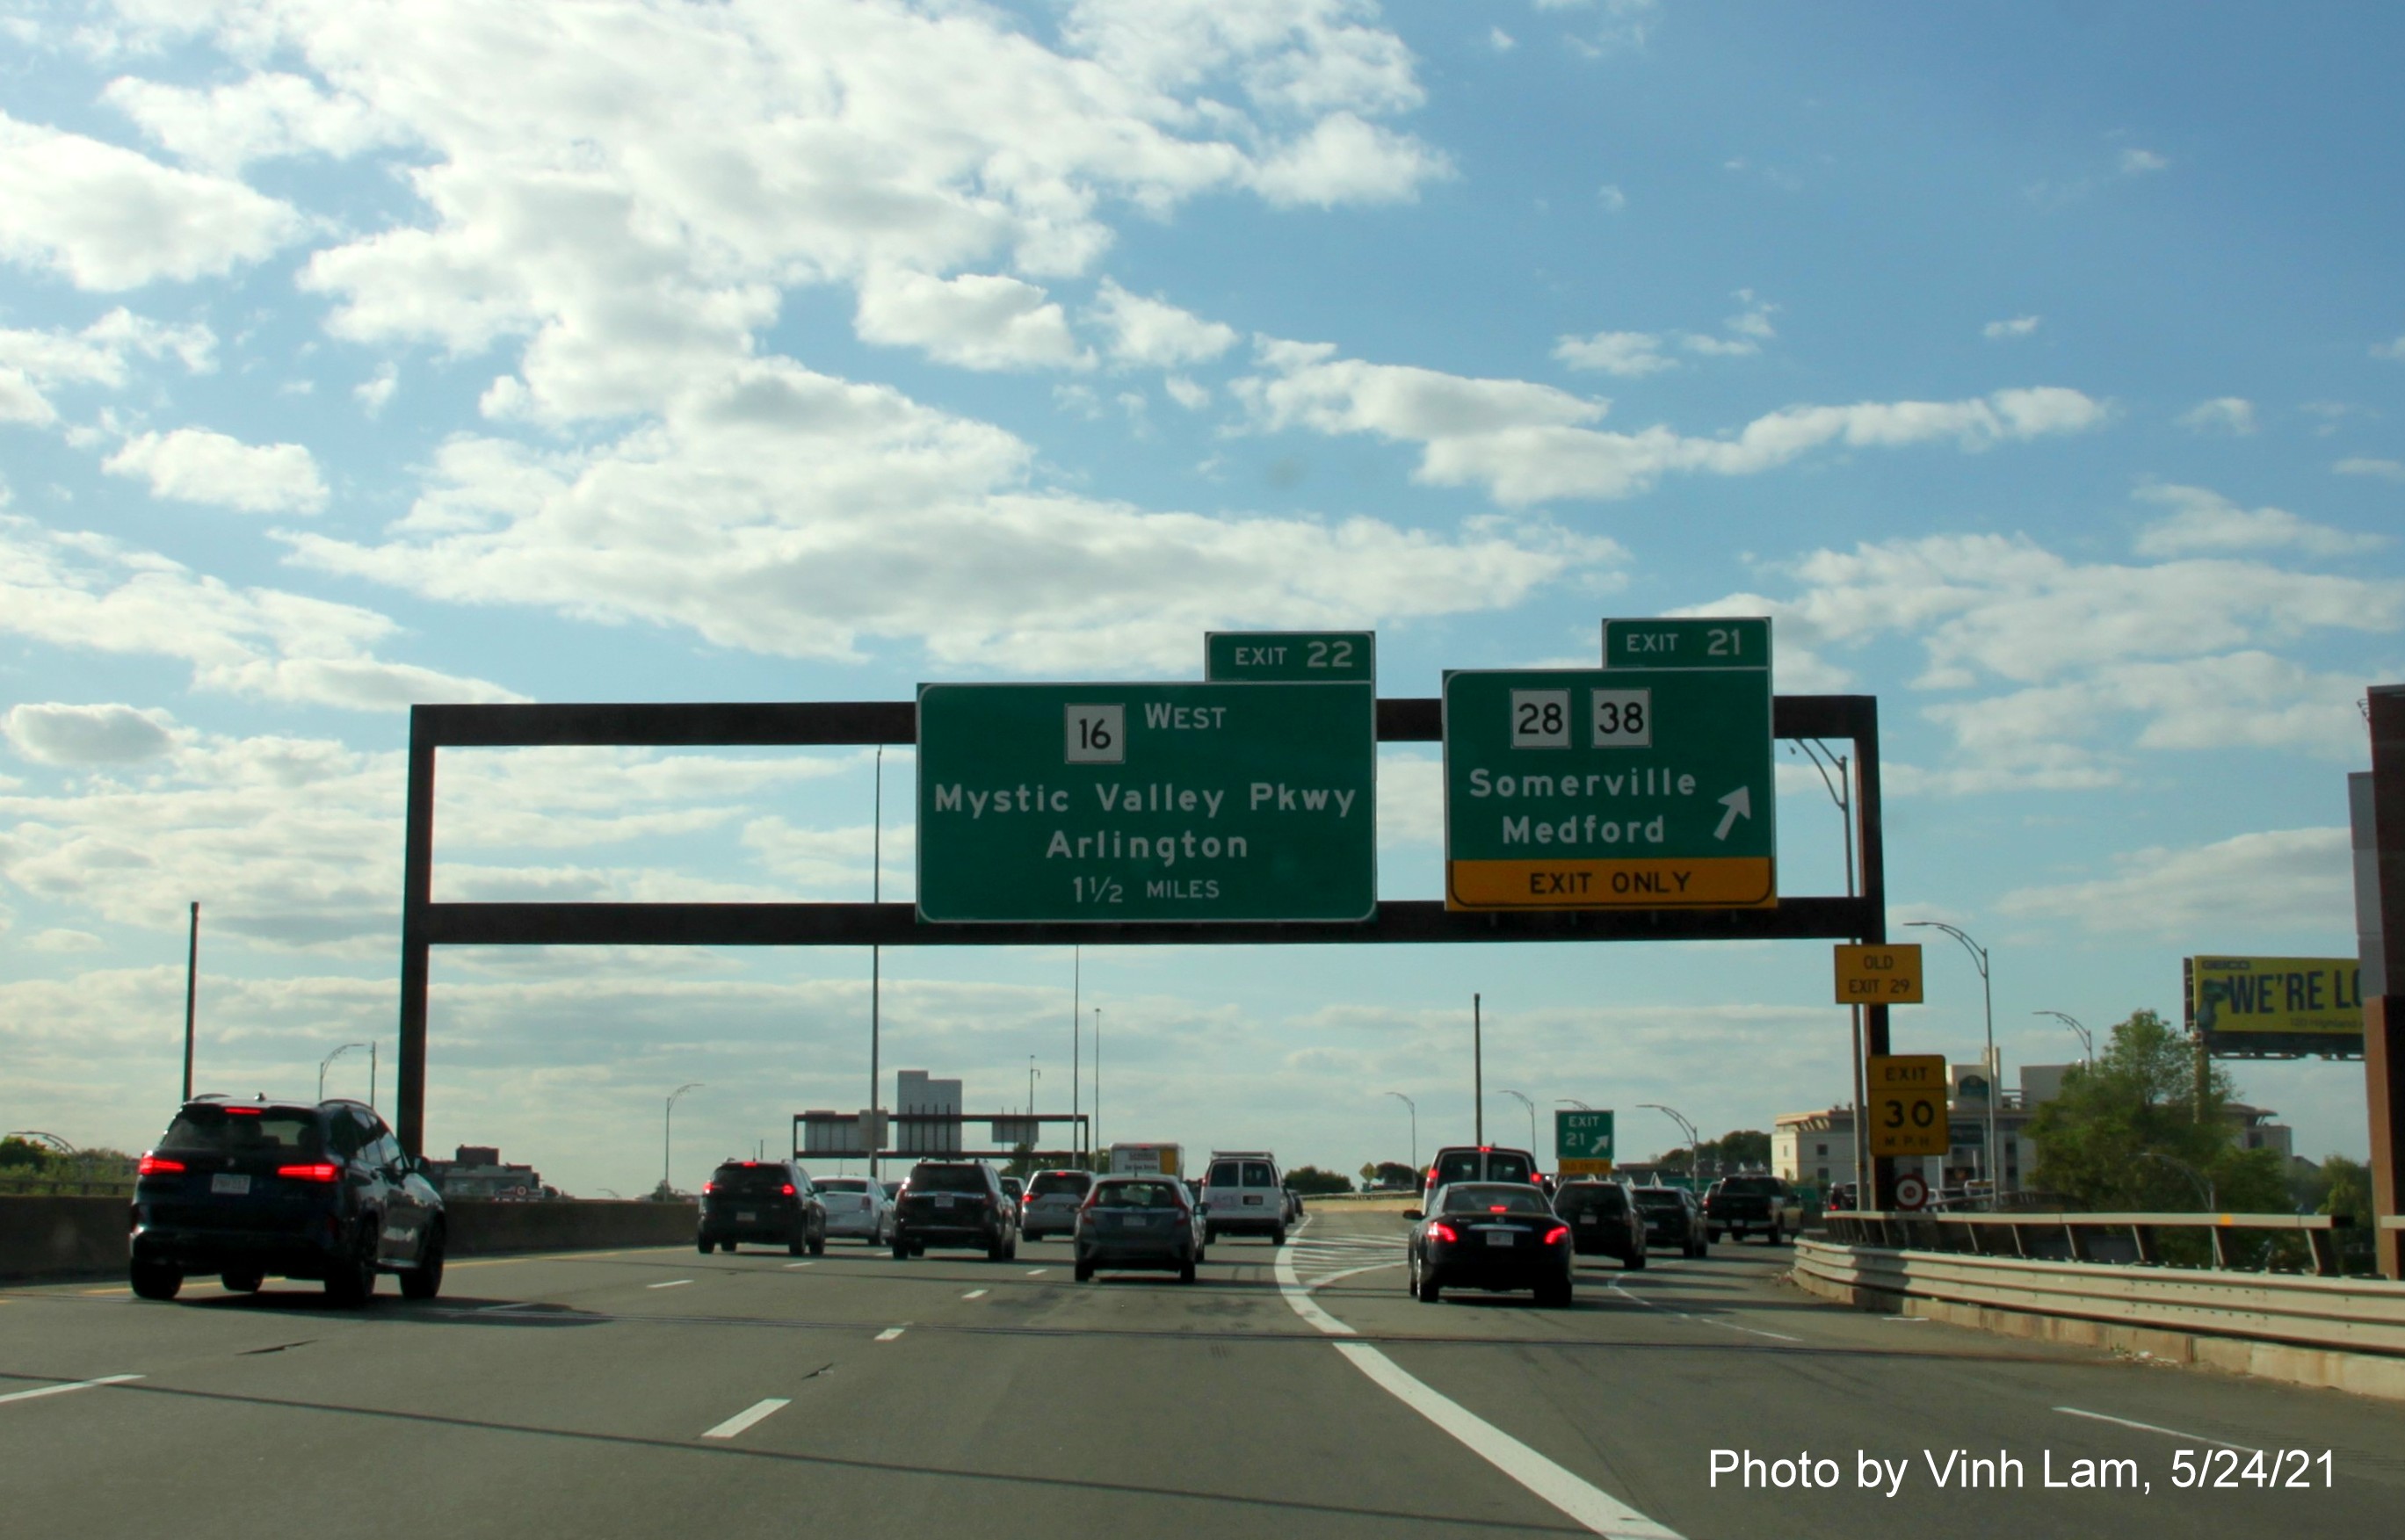 Image of overhead ramp sign for MA 28/38 exit with new milepost based exit number on I-93 North in Somerville, by Vinh Lam, May 2021